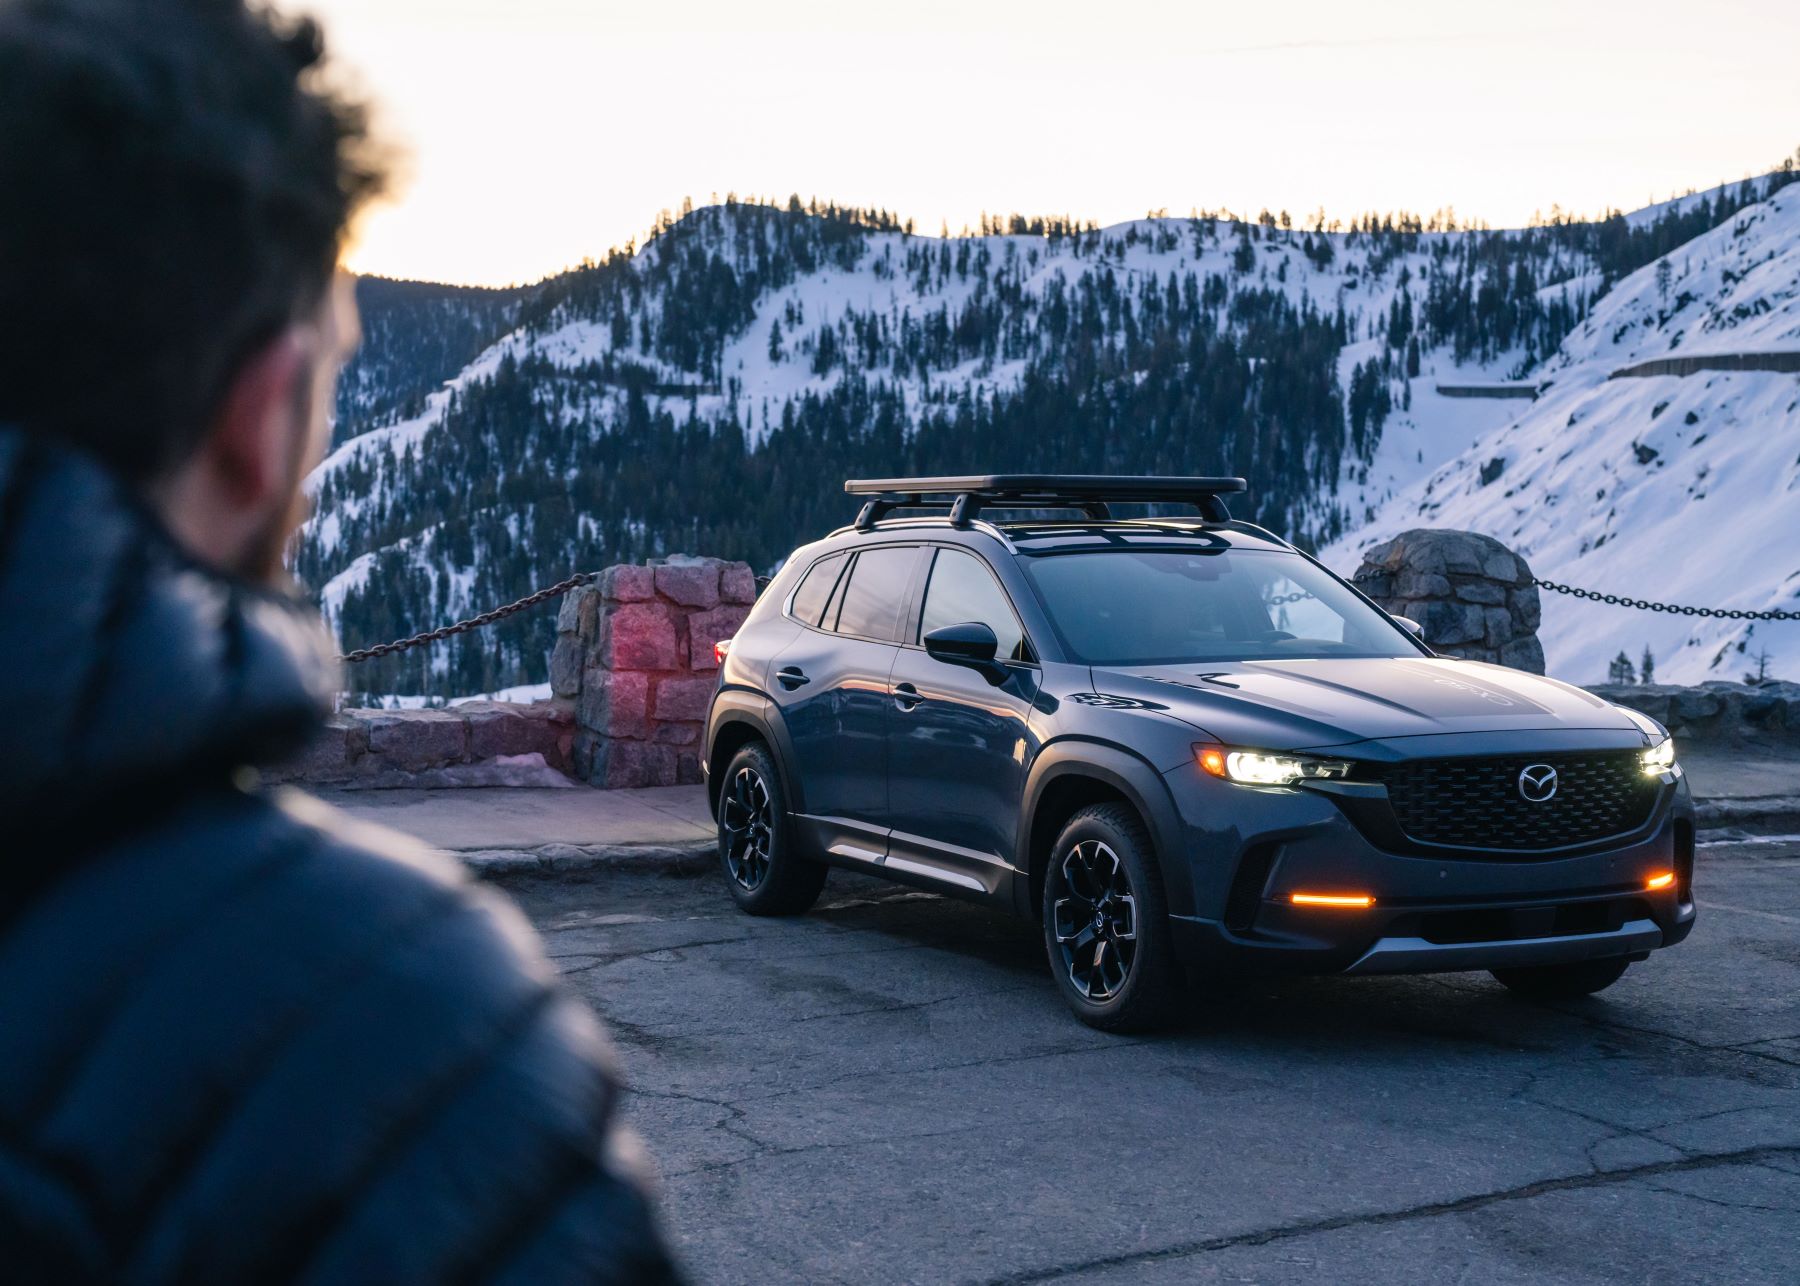 A 2023 Mazda CX-50 compact crossover SUV model parked on a cracked asphalt lot in snowy forest mountains